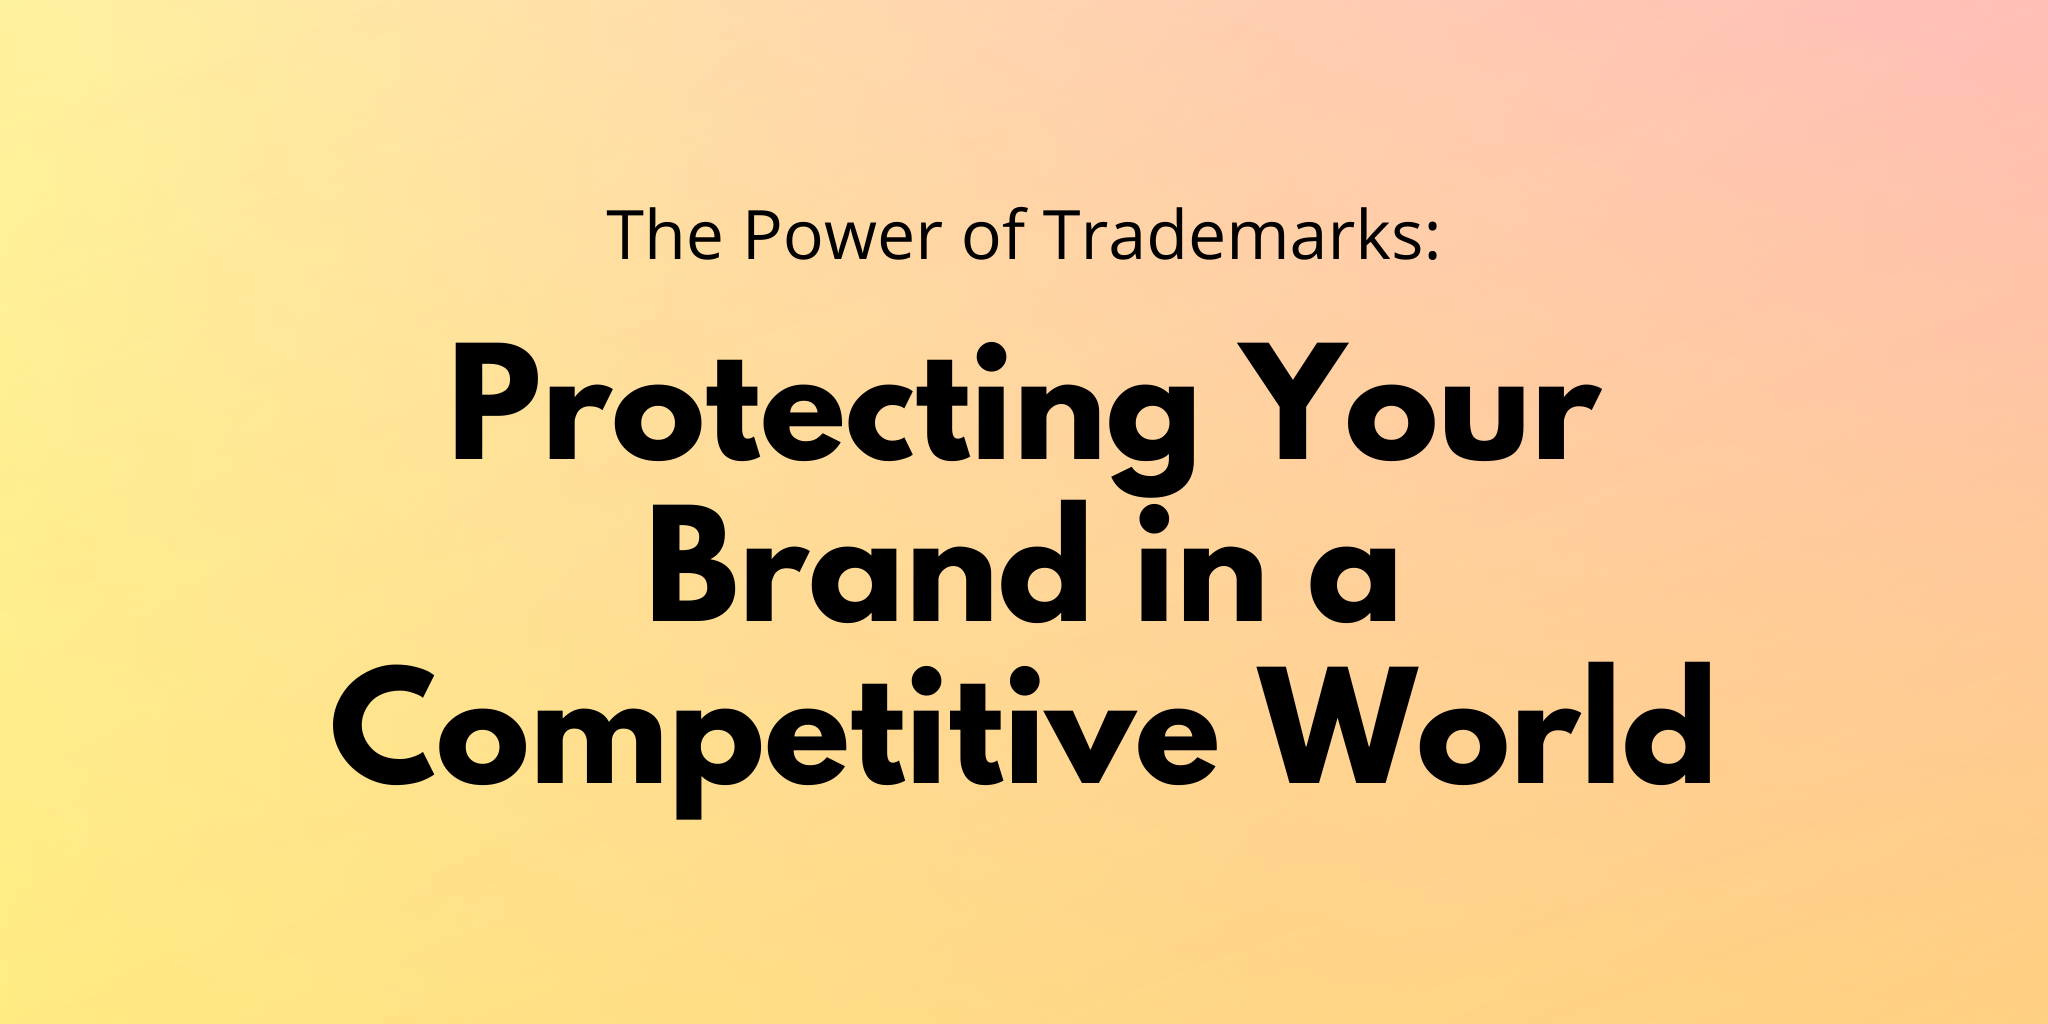 Protecting Your Brand in a Competitive World